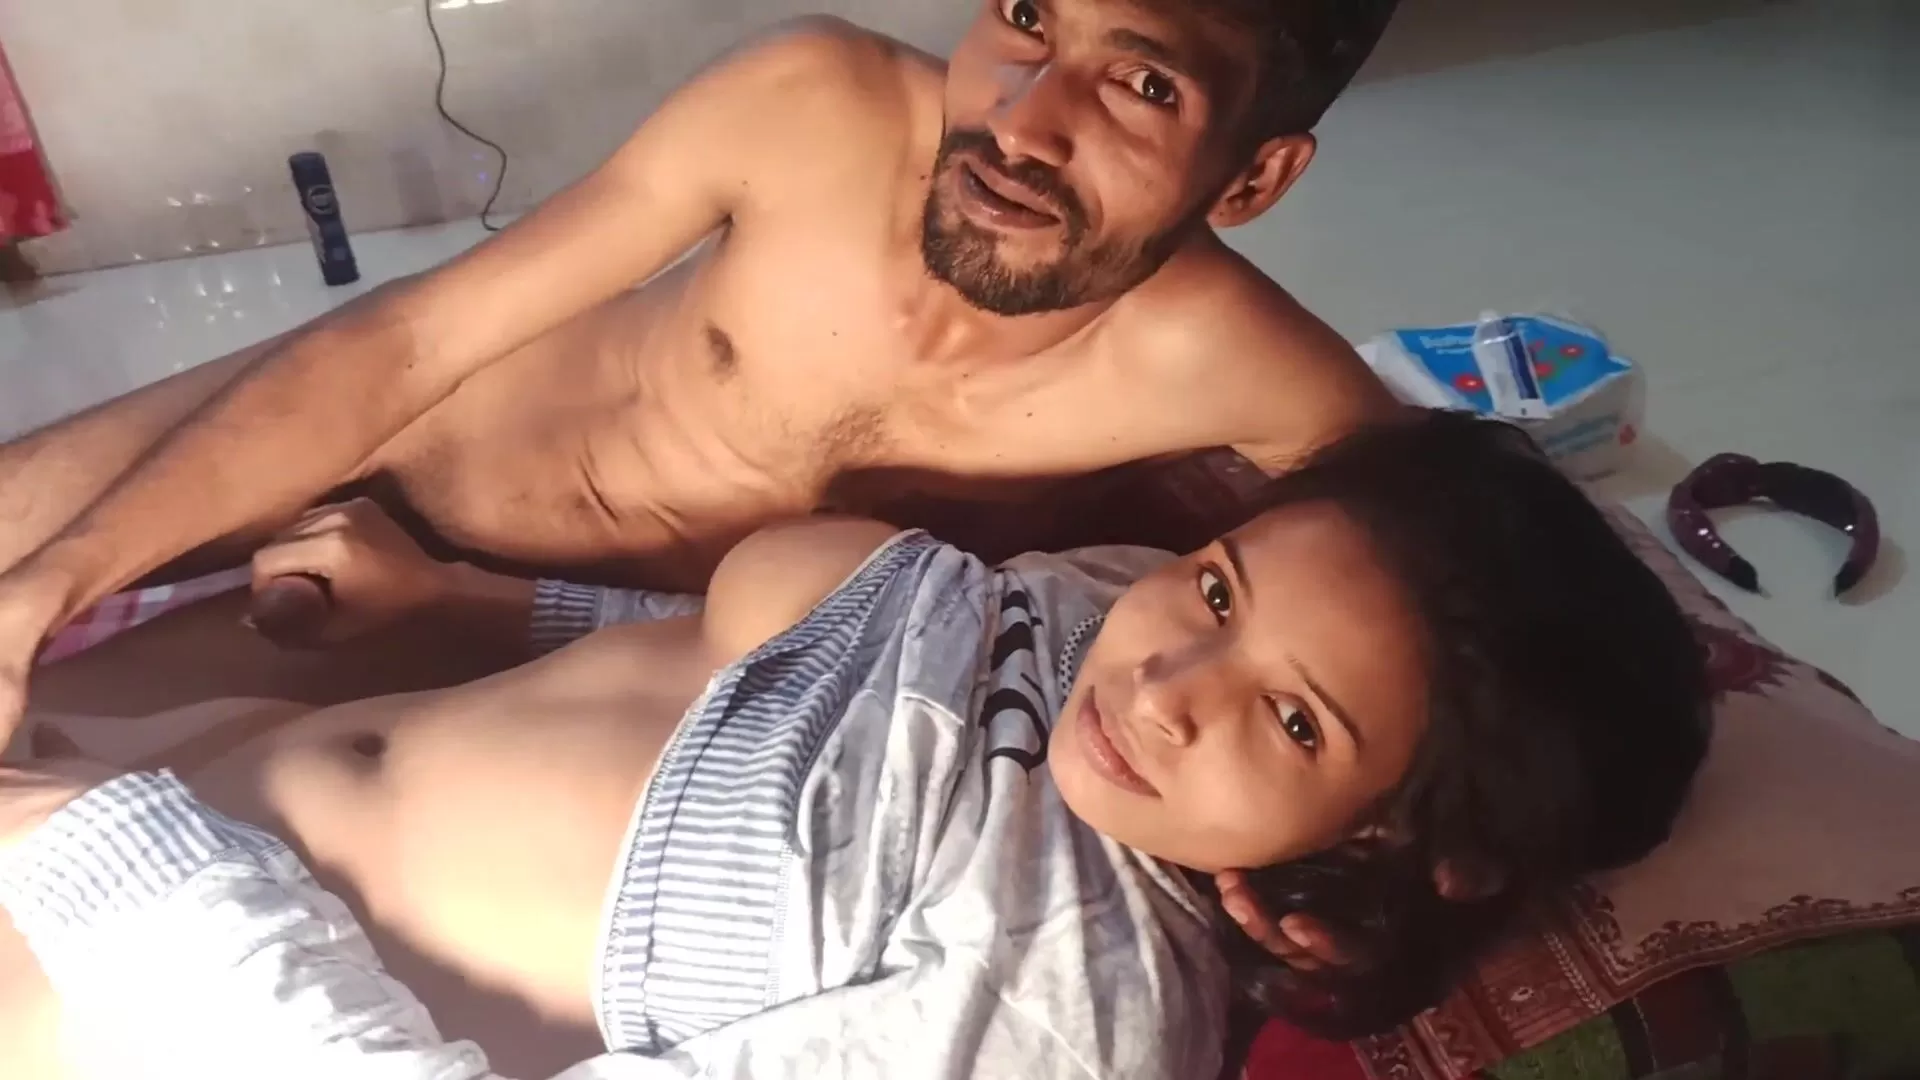 Swinger Couple Brings In Hot Inexperienced Cock To Play Bengali sex watch online pic